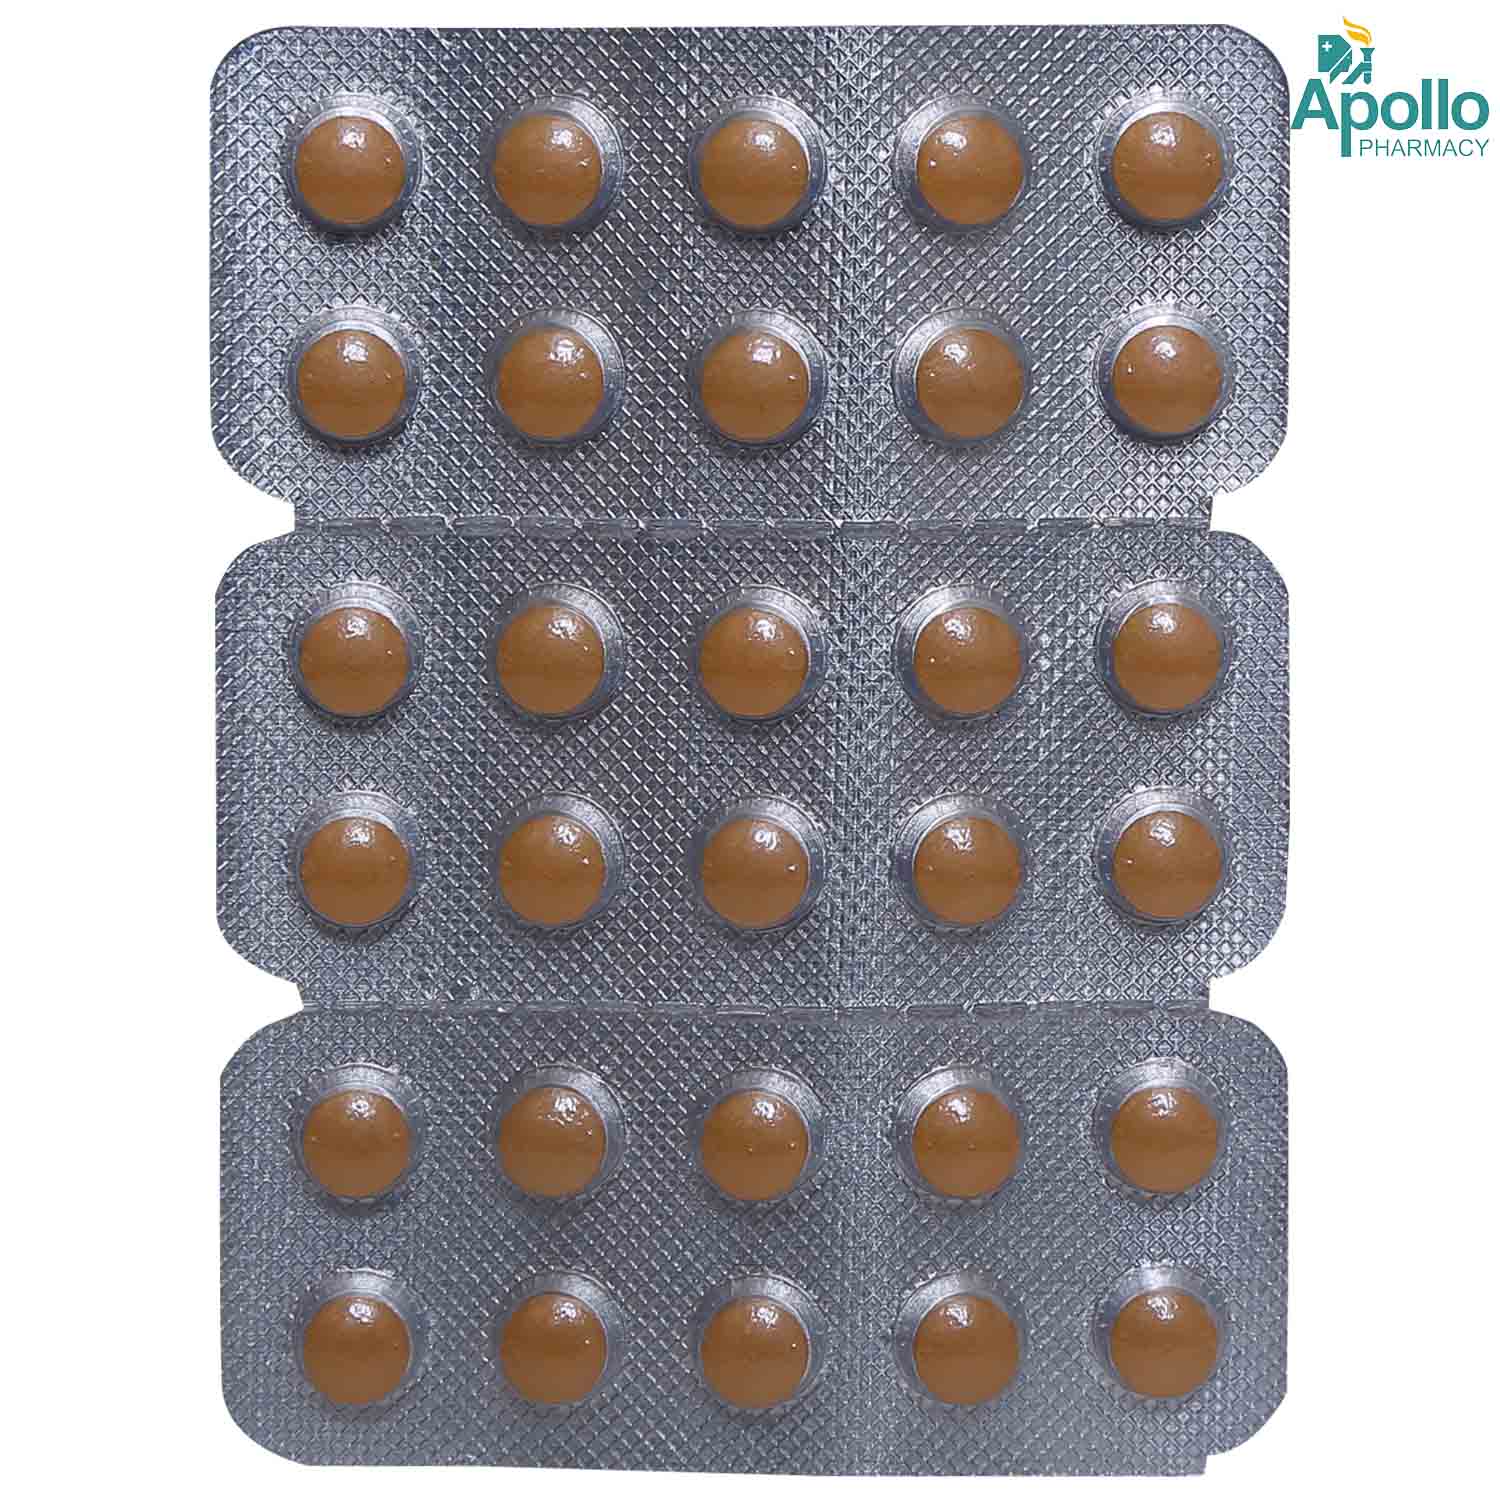 CETANIL CT TABLET, Pack of 10 TABLETS